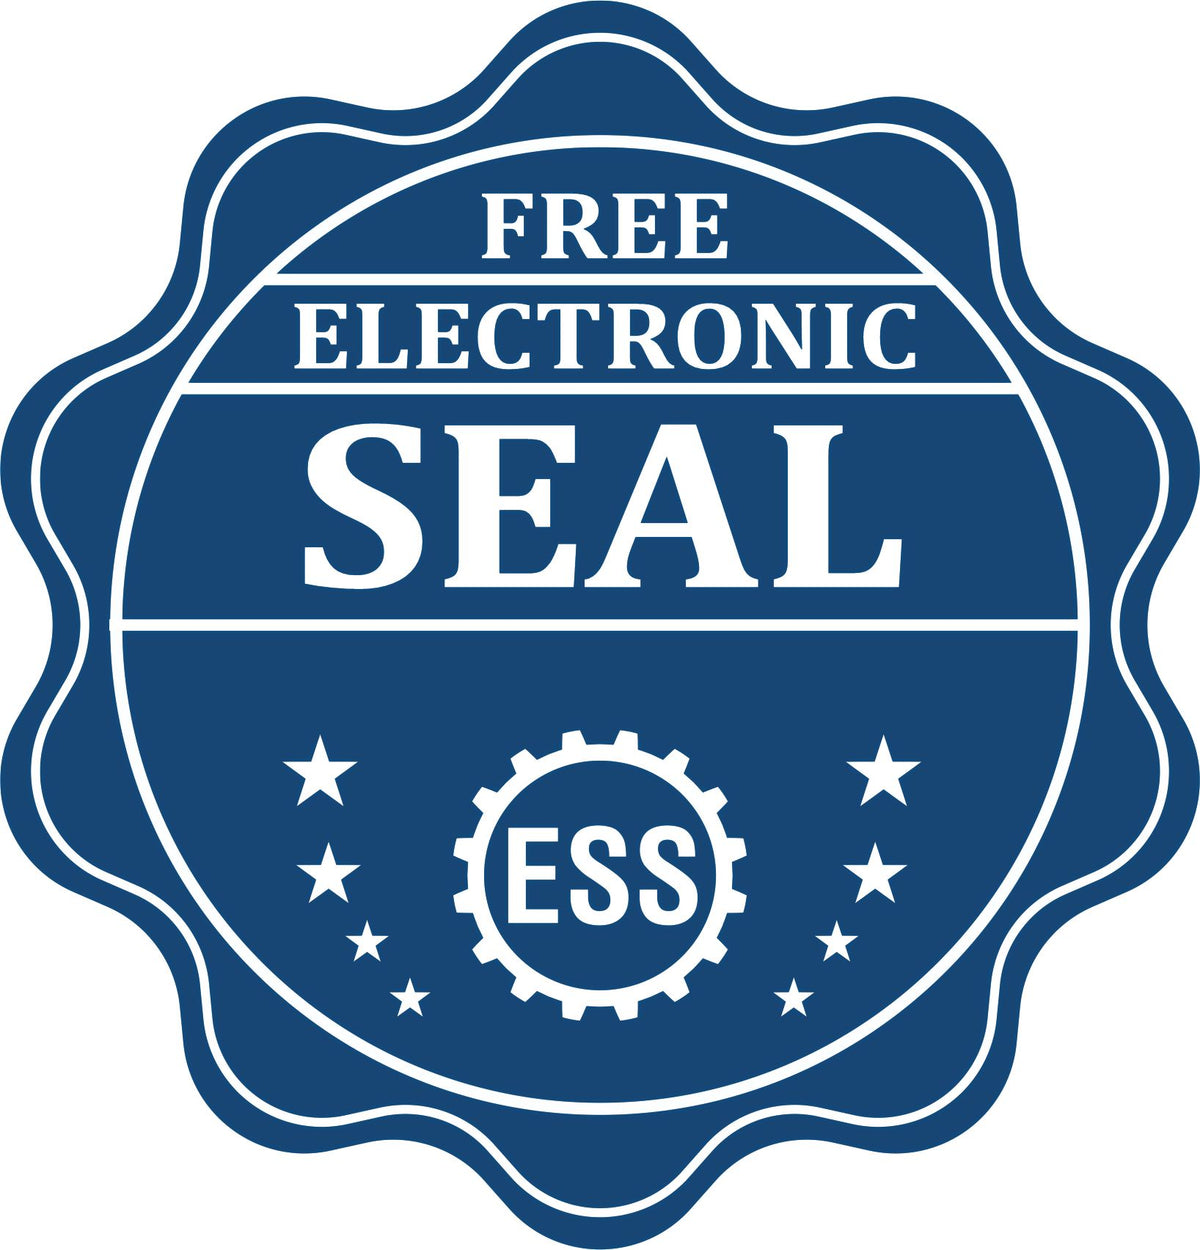 A badge showing a free electronic seal for the Gift North Carolina Engineer Seal with stars and the ESS gear on the emblem.